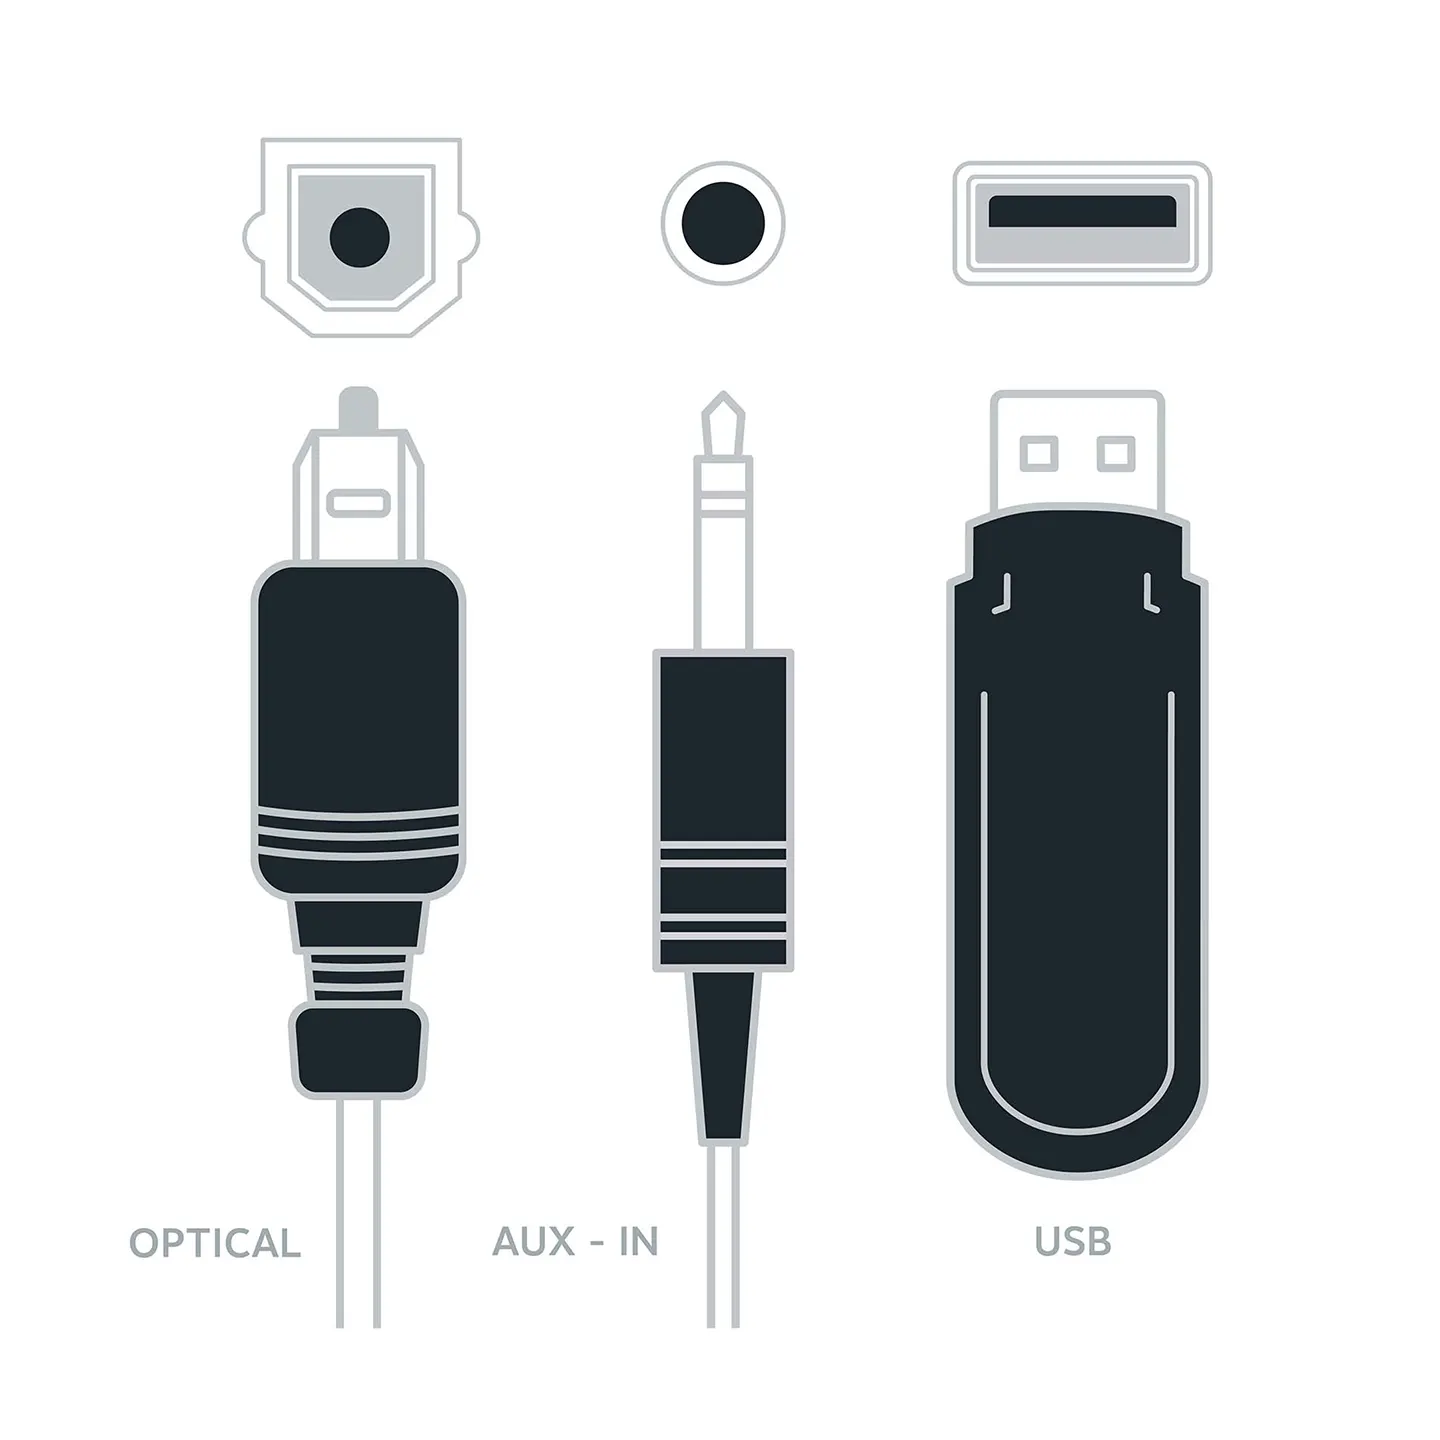 Optical, aux-in, USB connections